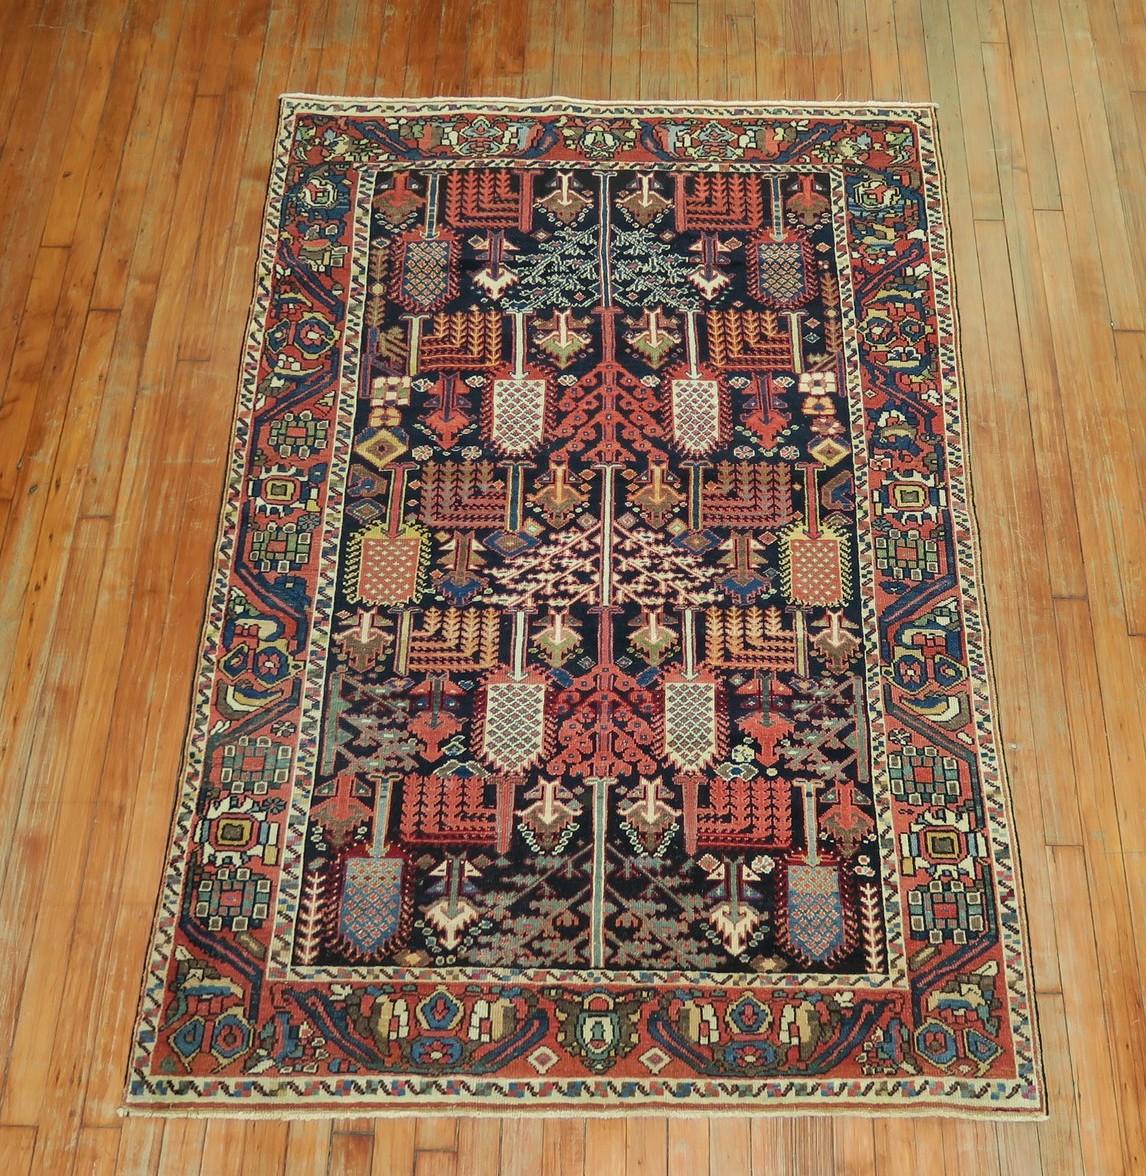 Stunning Persian Bakhtiari rug featuring a weeping tree of life motif on a navy ground. Great condition overall. Colors are very warm and subtle. Not too bright not too muted, circa 1920.

Measures: 4'2